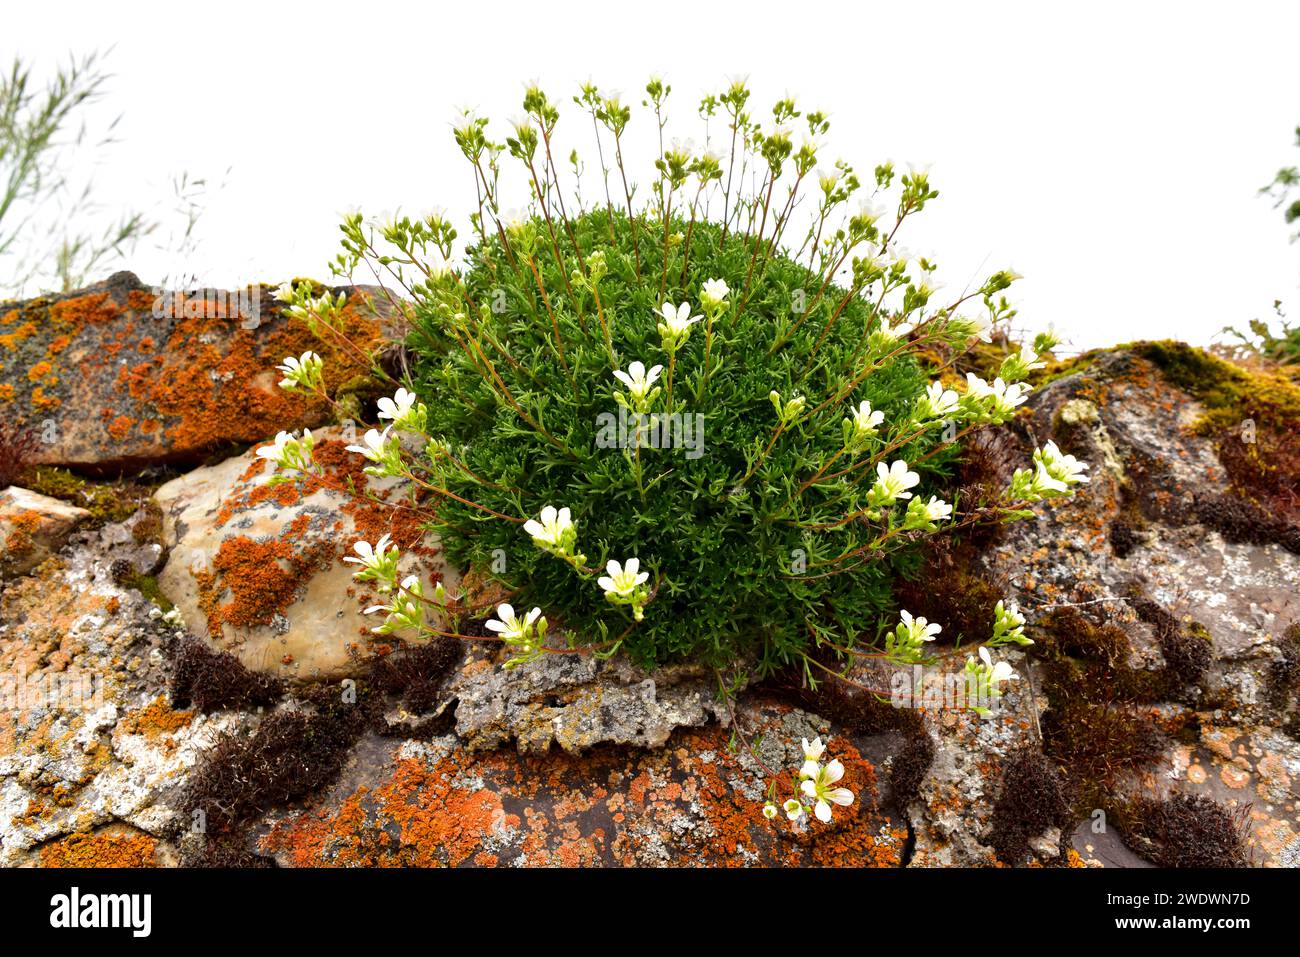 Saxifraga babiana is a perennial herb endemic to Cantabrian Mountains (Asturias and Leon). This photo was taken in Babia, Leon province, Castilla-Leon Stock Photo